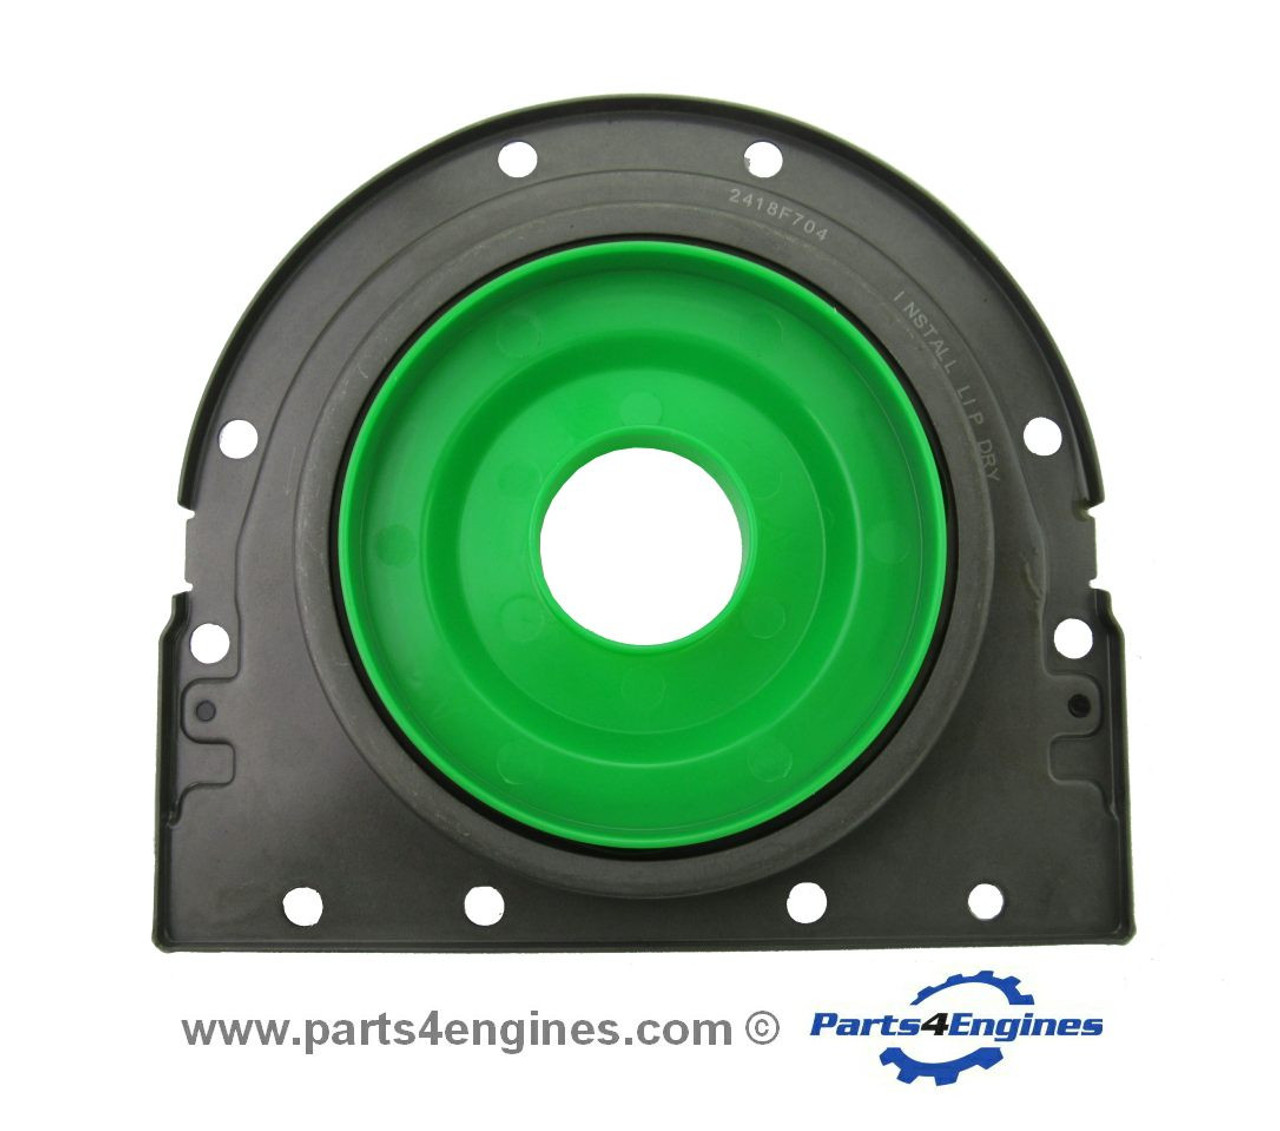 1103 and 1104 Rear crankshaft oil seal, from parts4engines.com